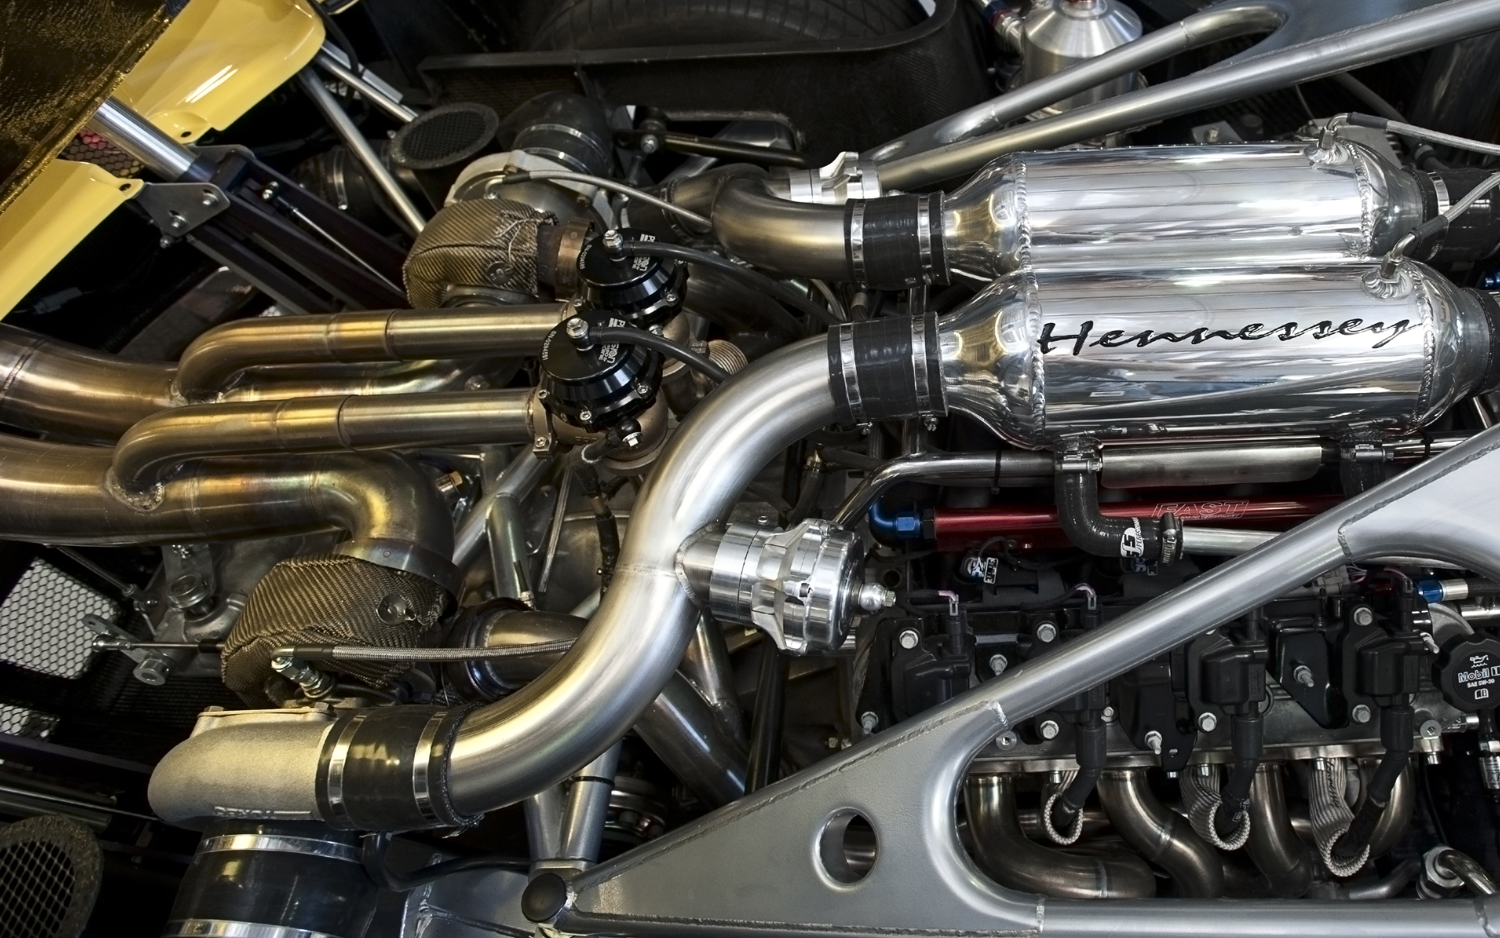 World's Fastest Production Cart- Hennessey Venom GT Engine. 1244 bhp at 6600 rpm 0-60mph 2.7 Seconds